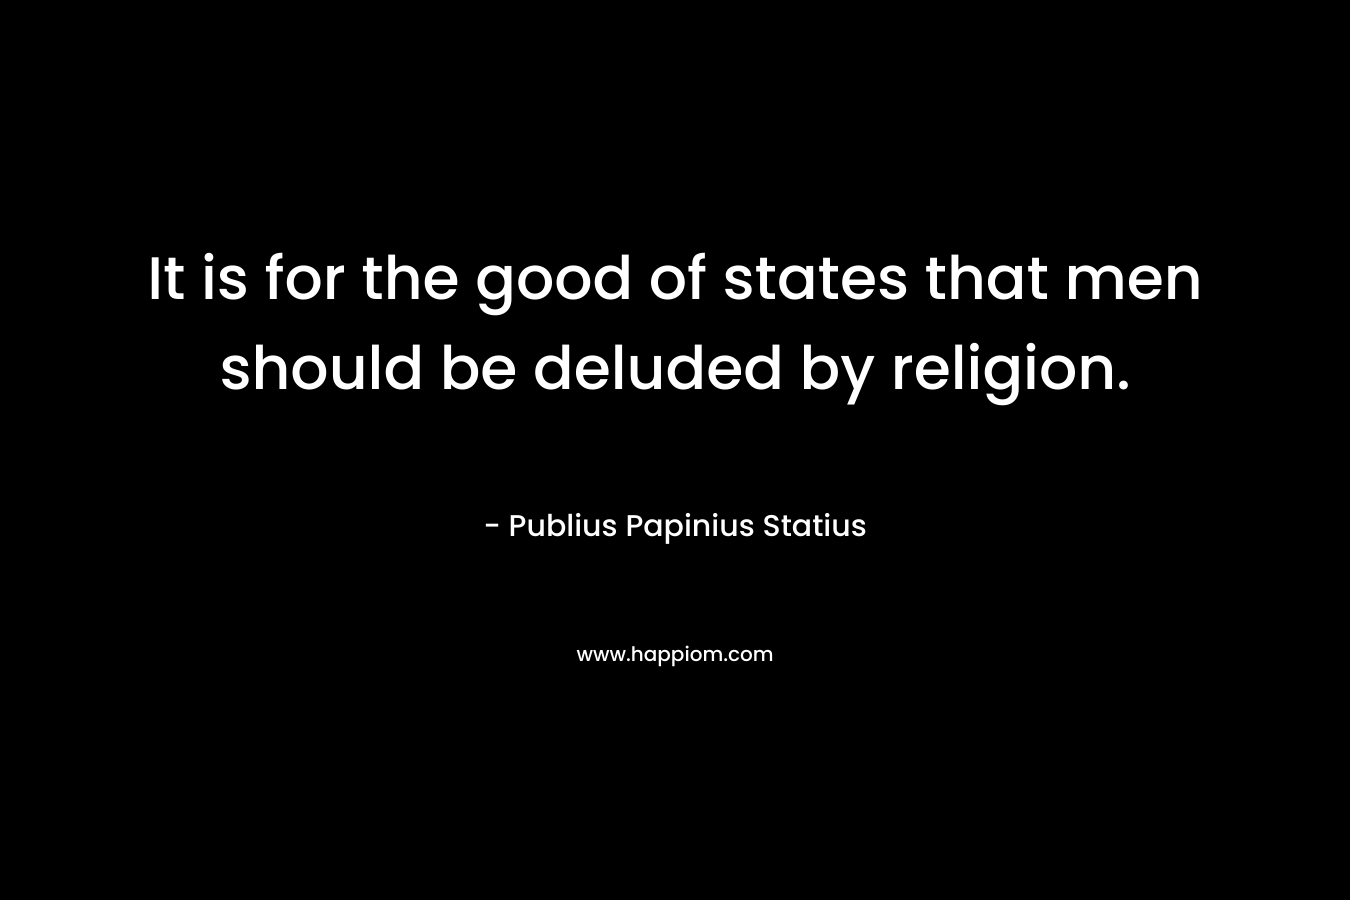 It is for the good of states that men should be deluded by religion. – Publius Papinius Statius